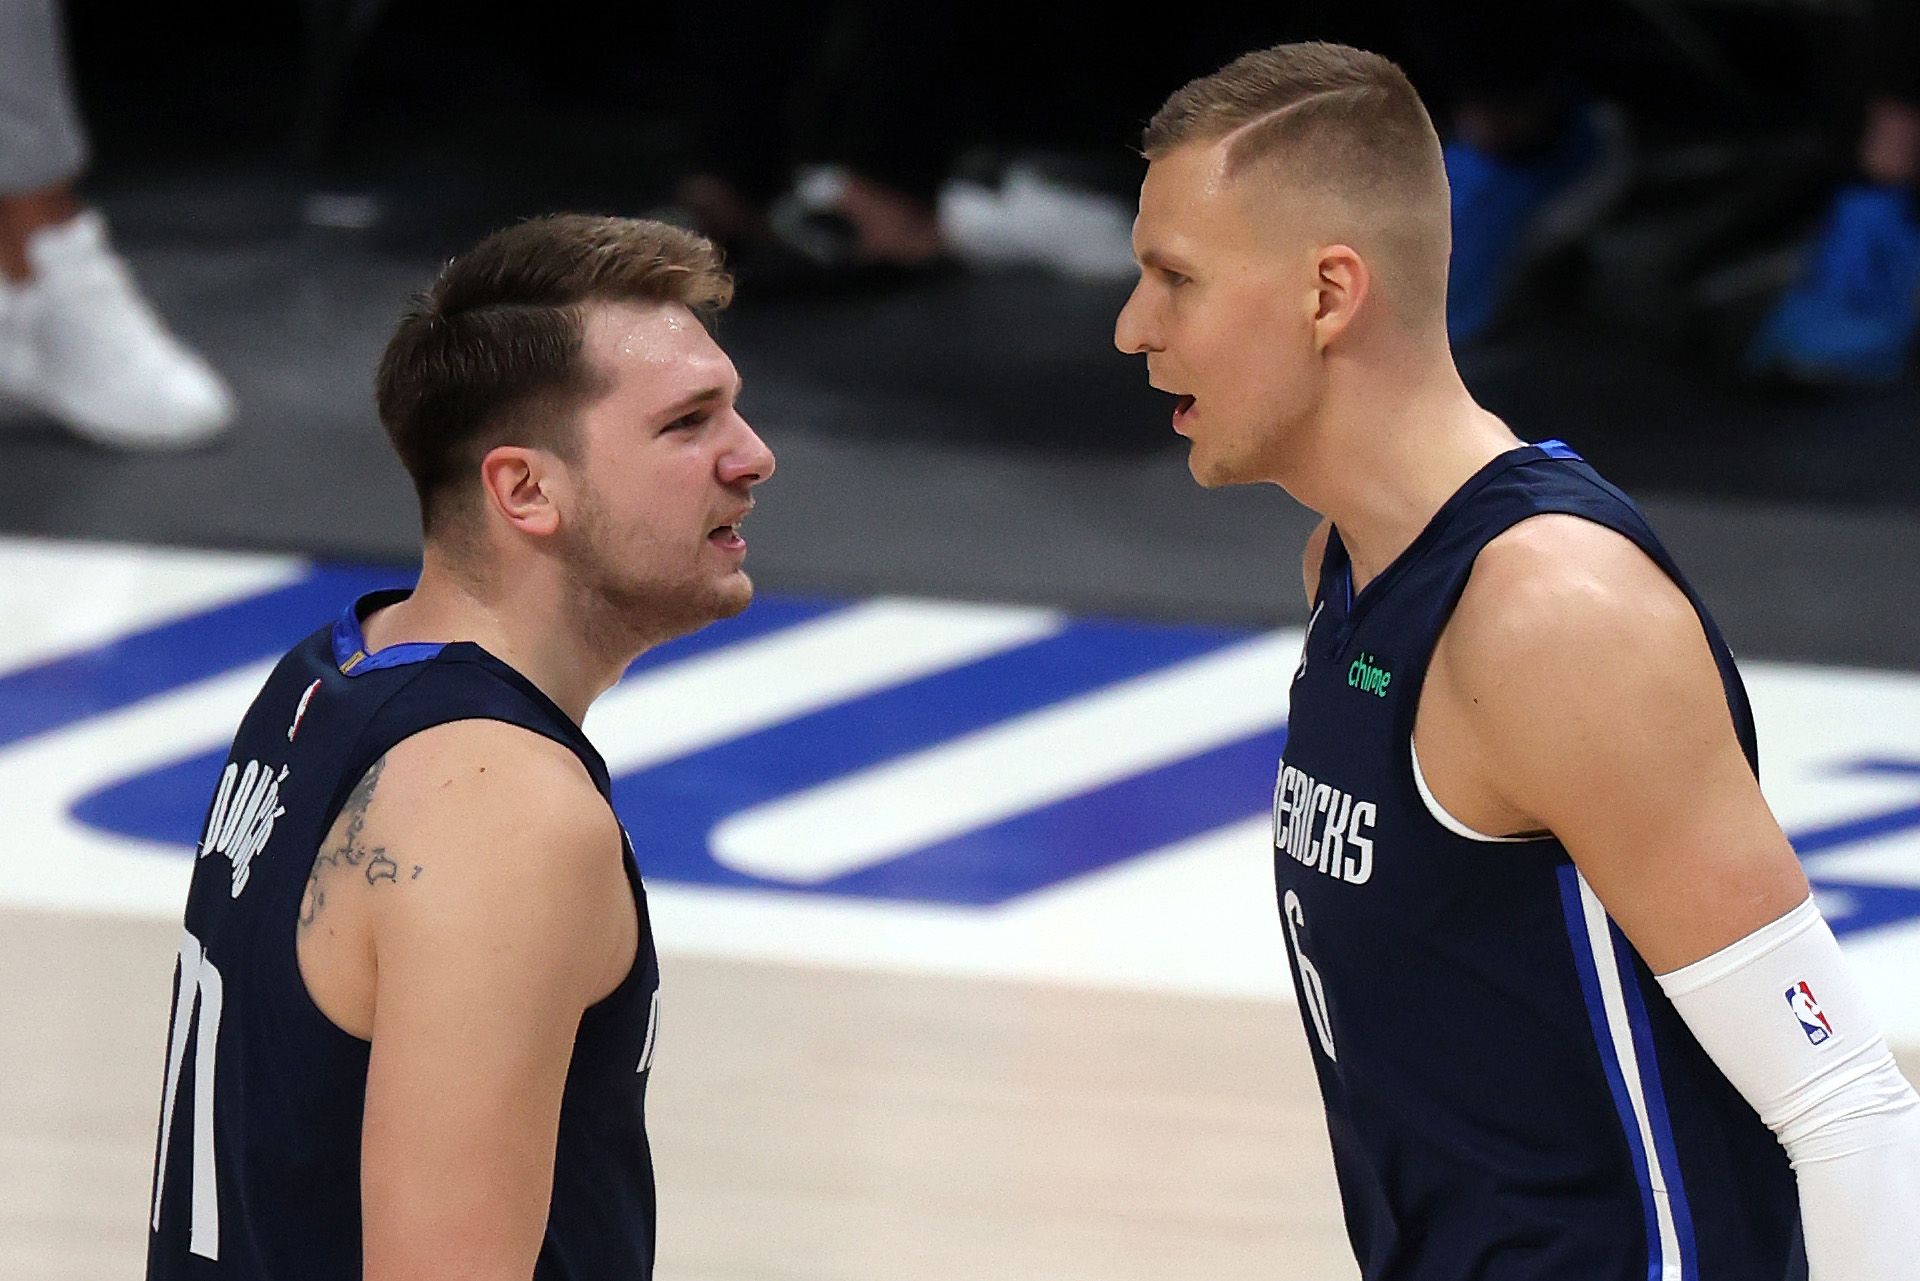 Luka Doncic and Kristaps Porzingis bump body after a successful play